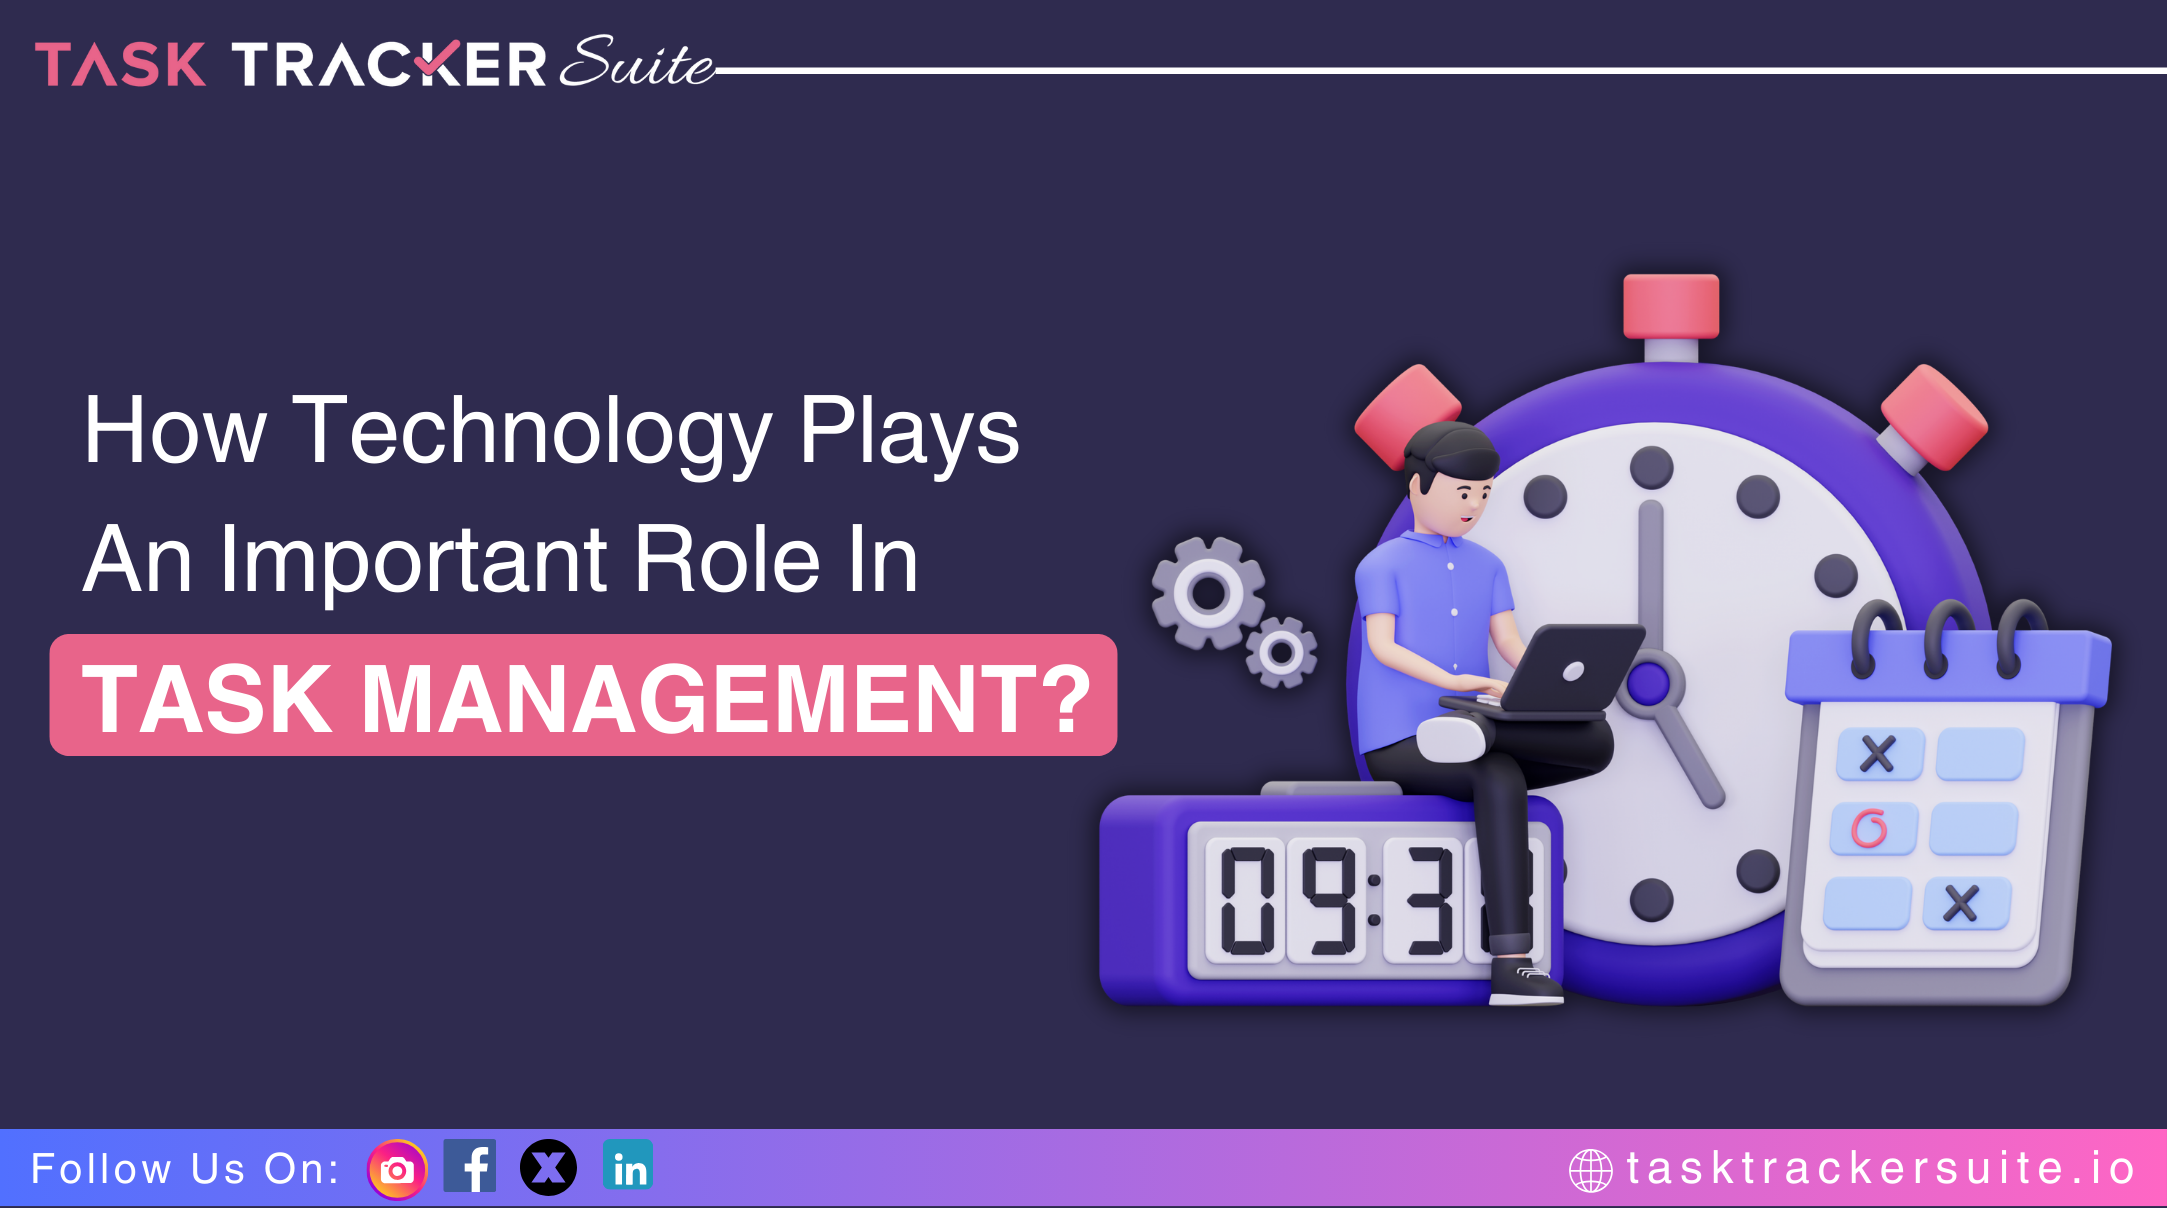 How Does Technology Play An Important Role In Task Management?